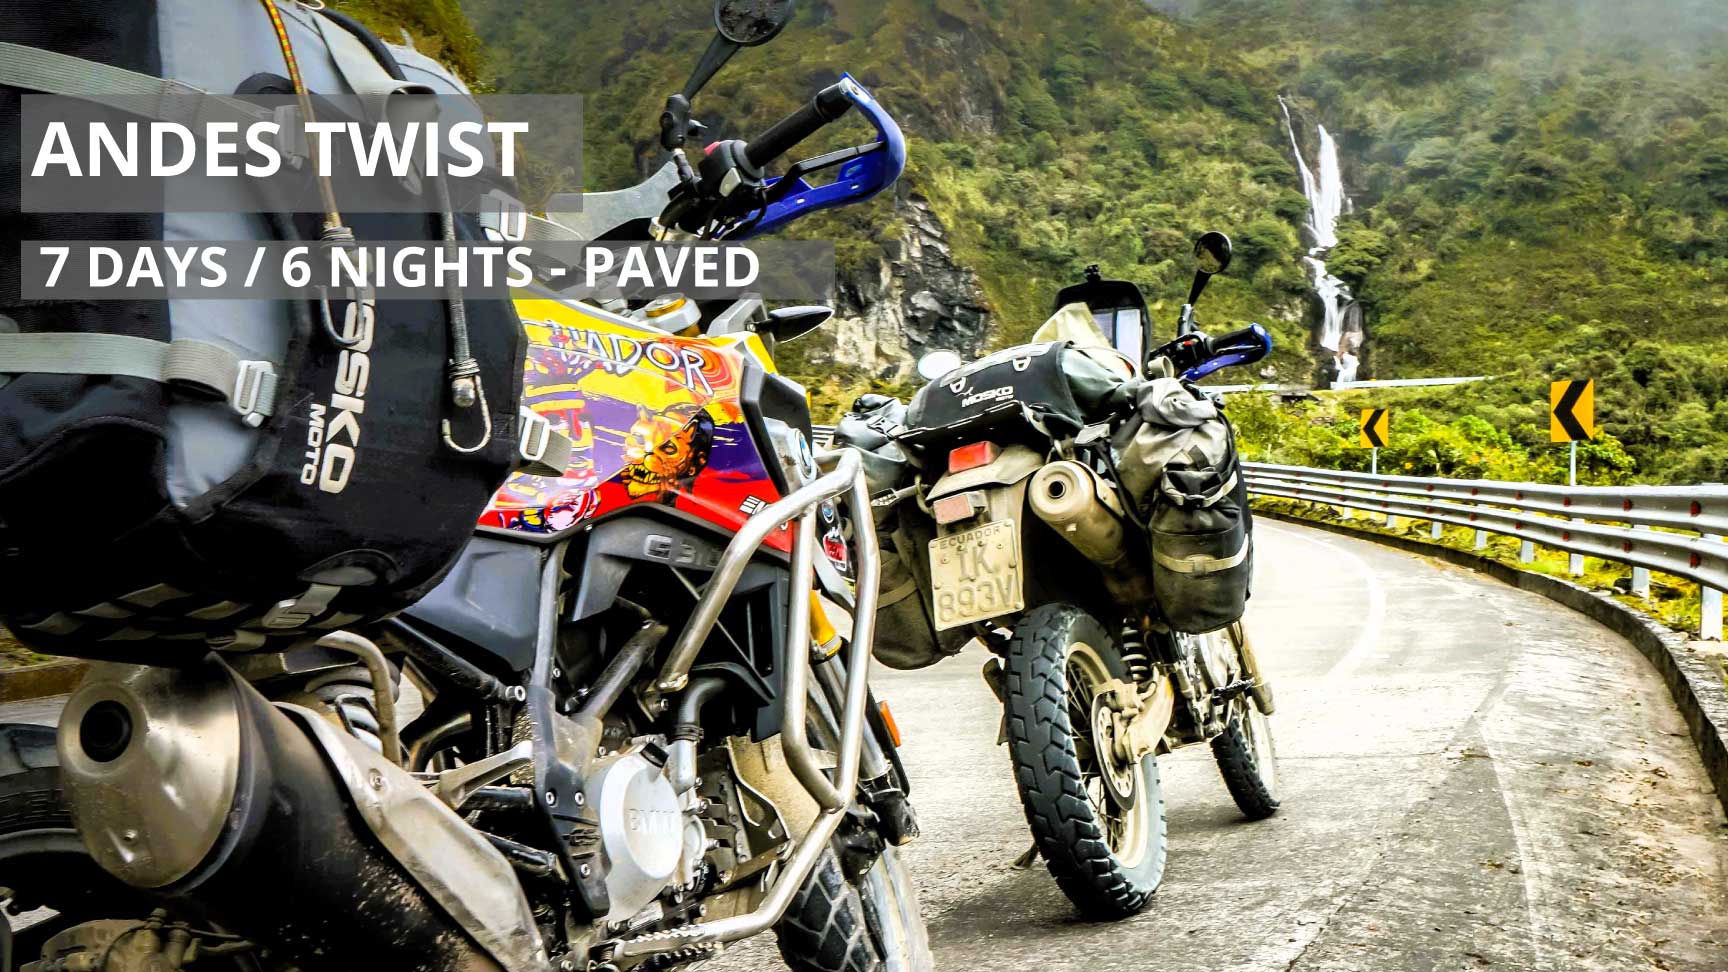 Andes Twist Guided Motorcycle Tour